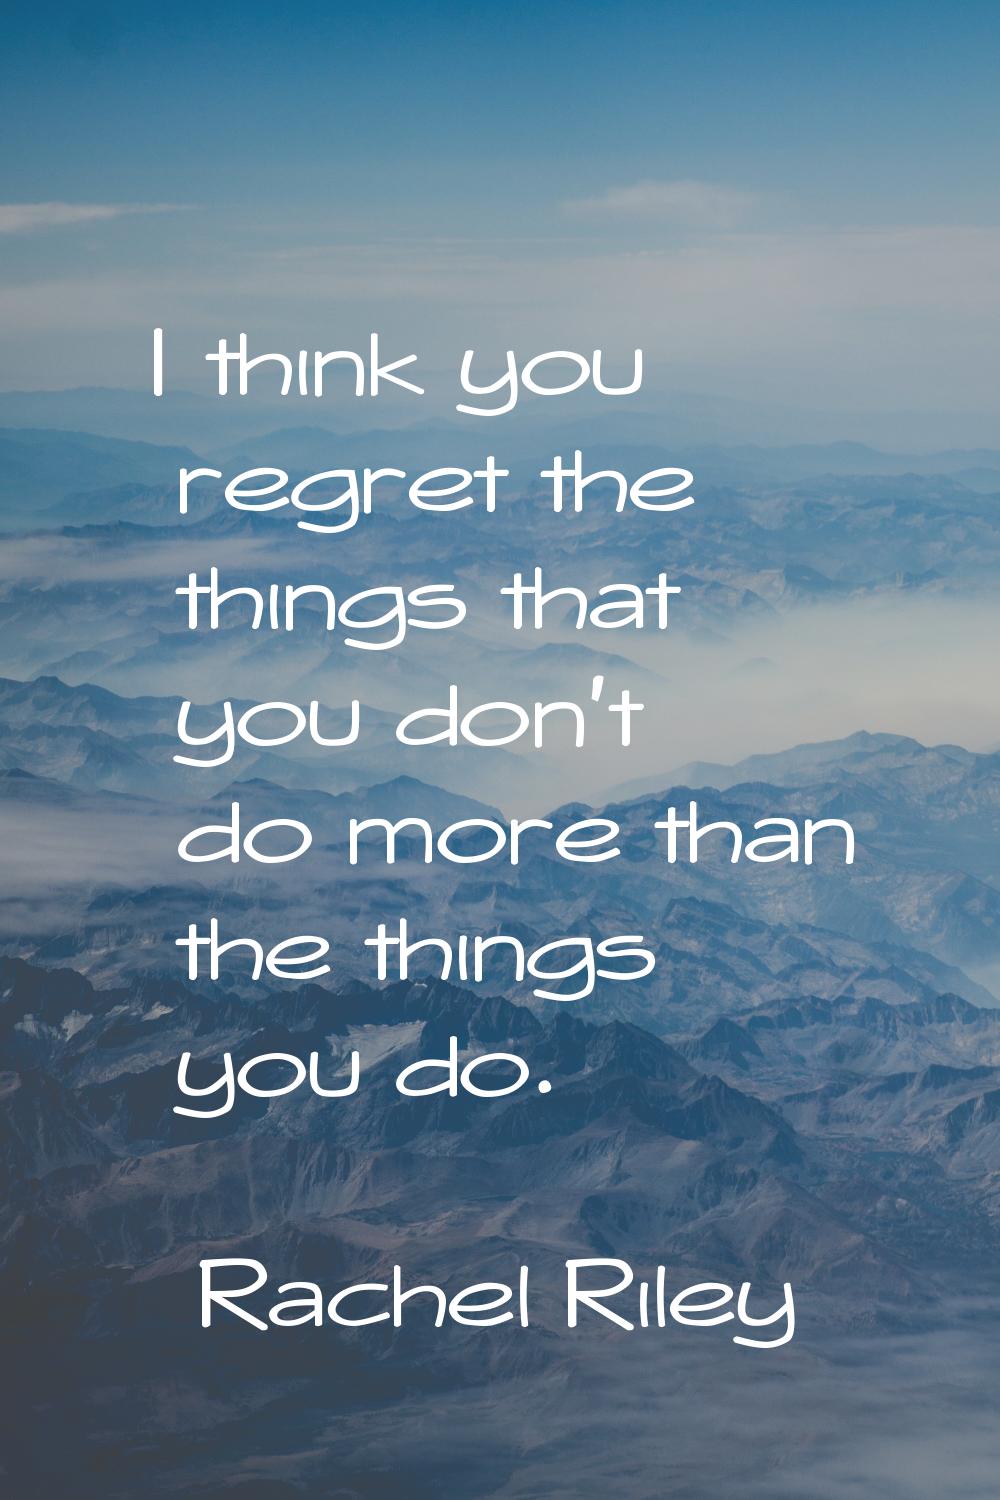 I think you regret the things that you don't do more than the things you do.